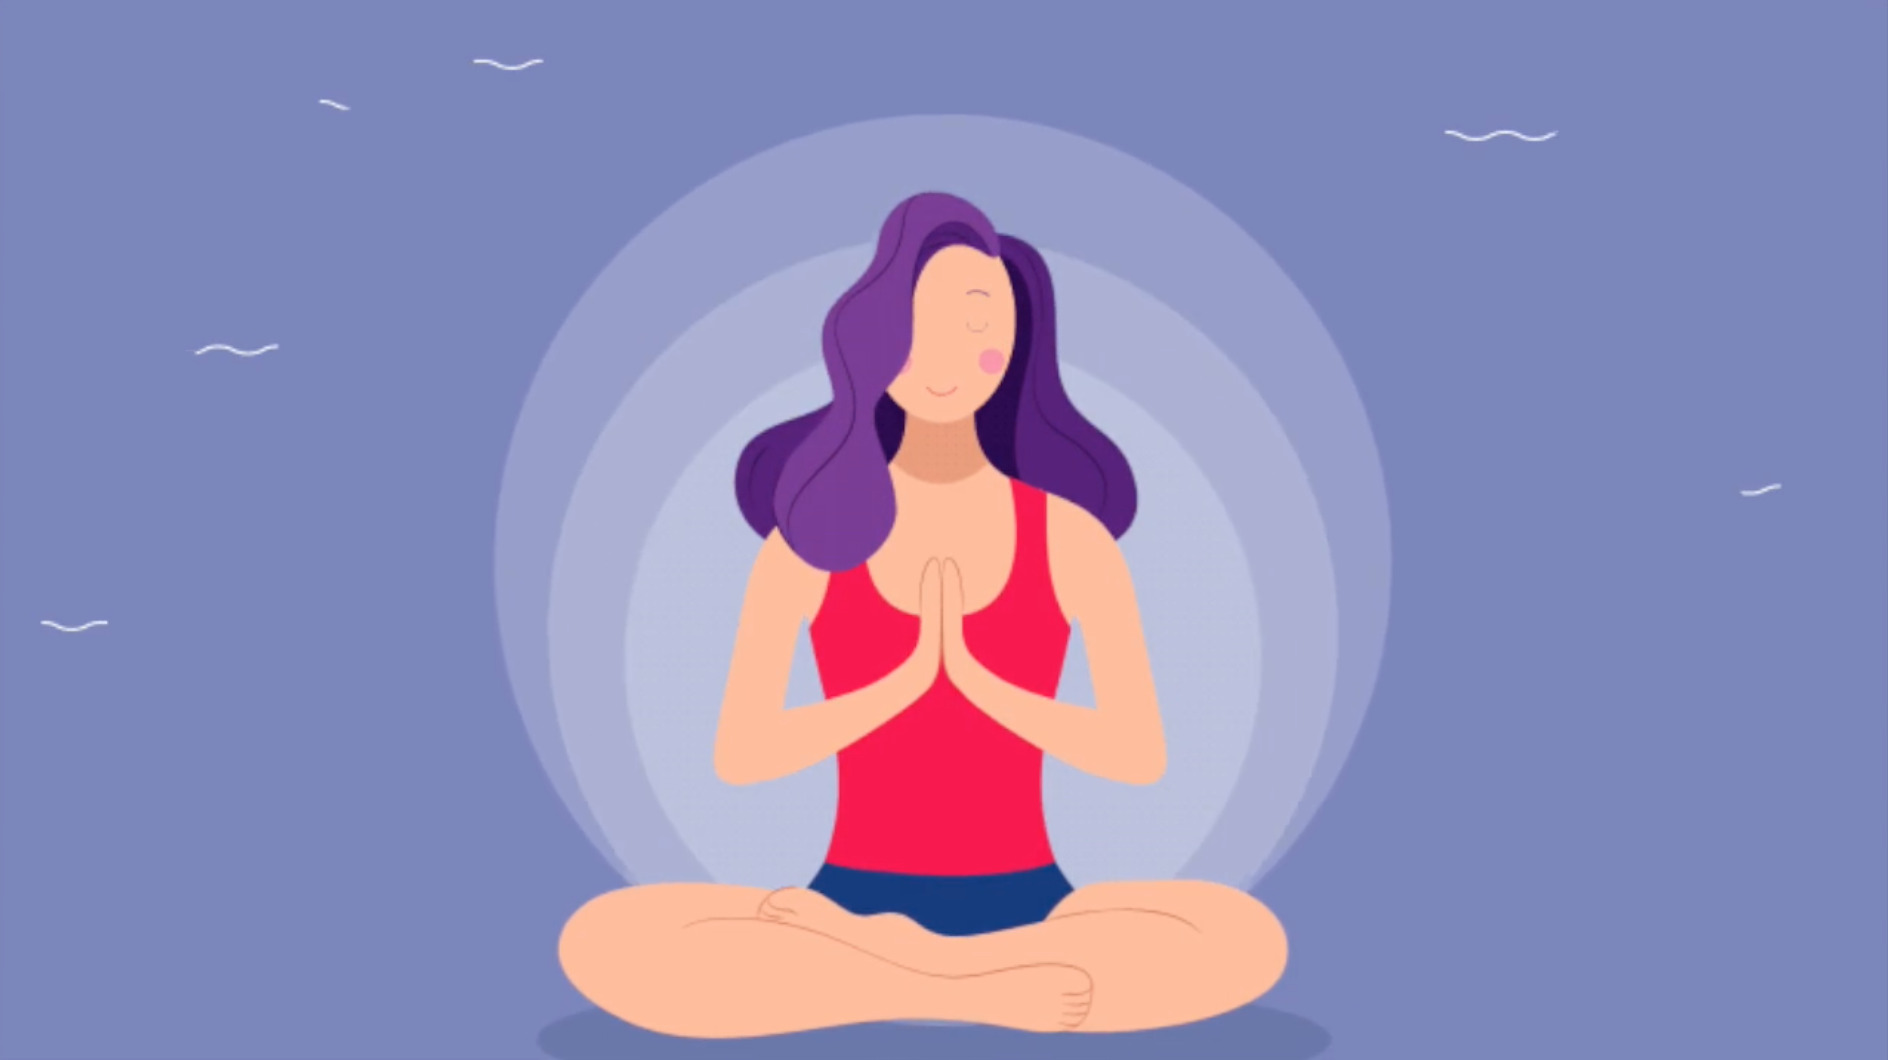 Introduction to Meditation video teaches breathing, wellness and focus